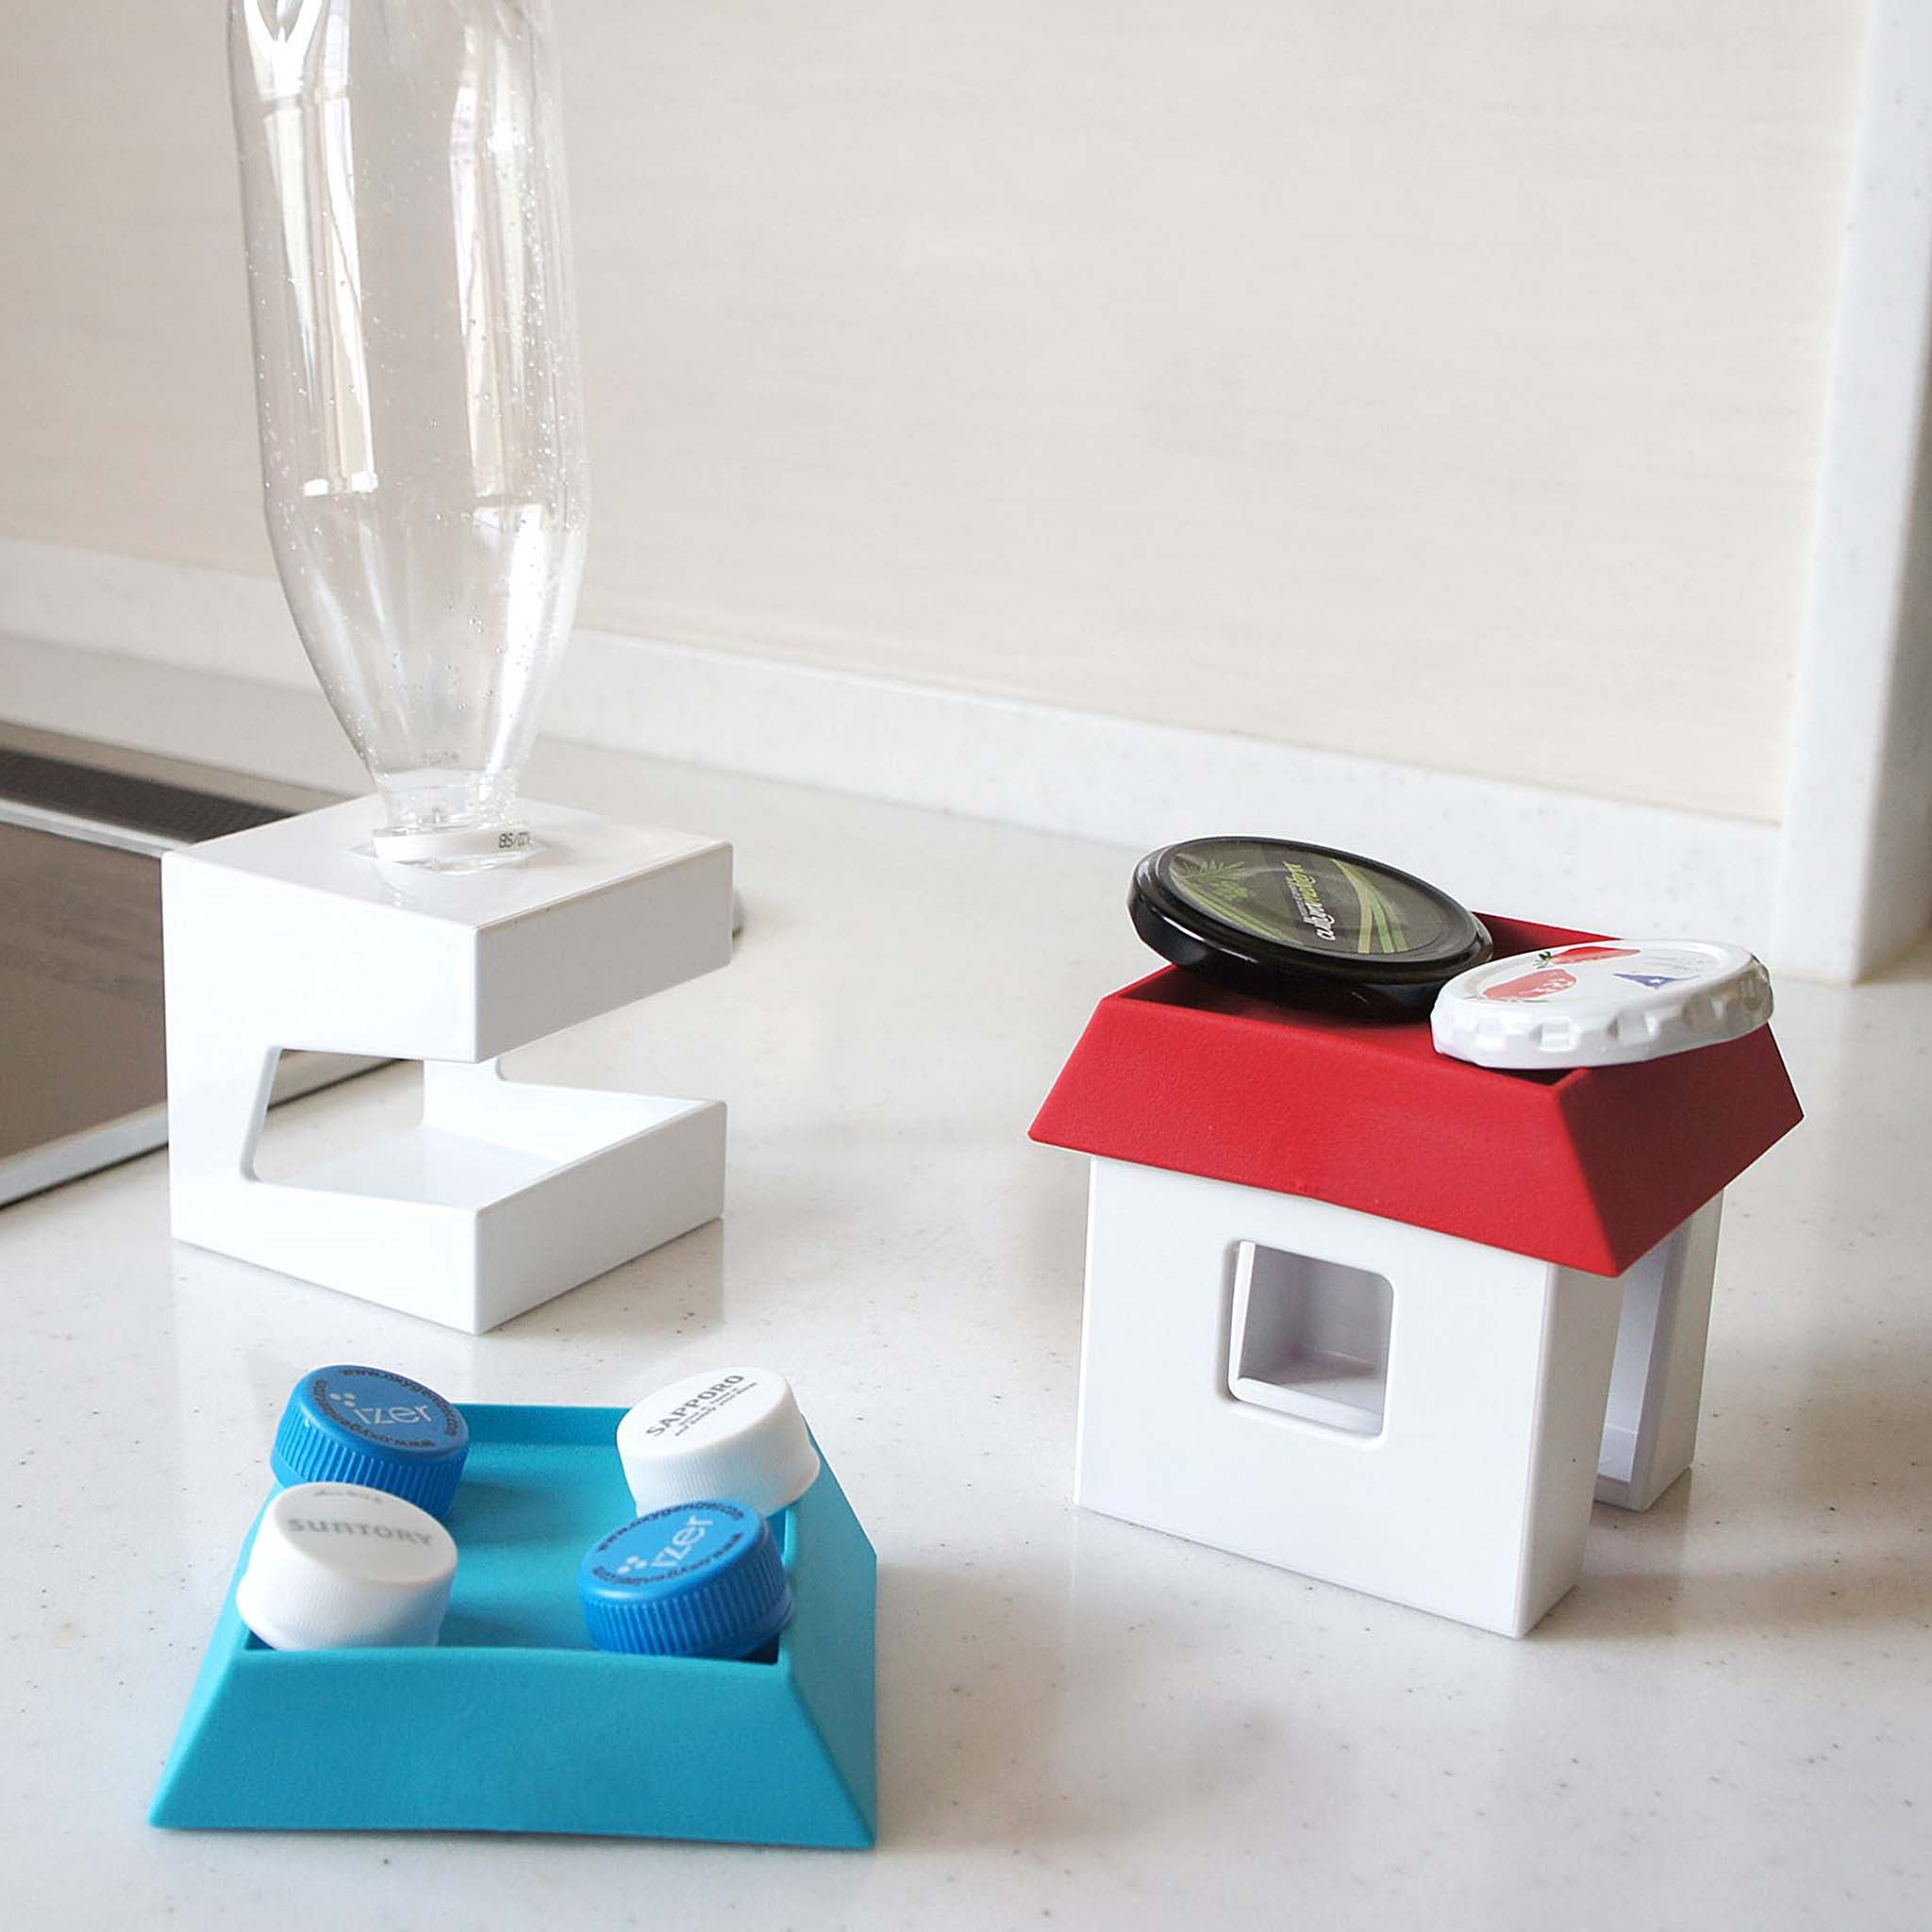 Apyui Multi Stand to stand a pot lid, chopsticks and even prop up book and keep the pages open.